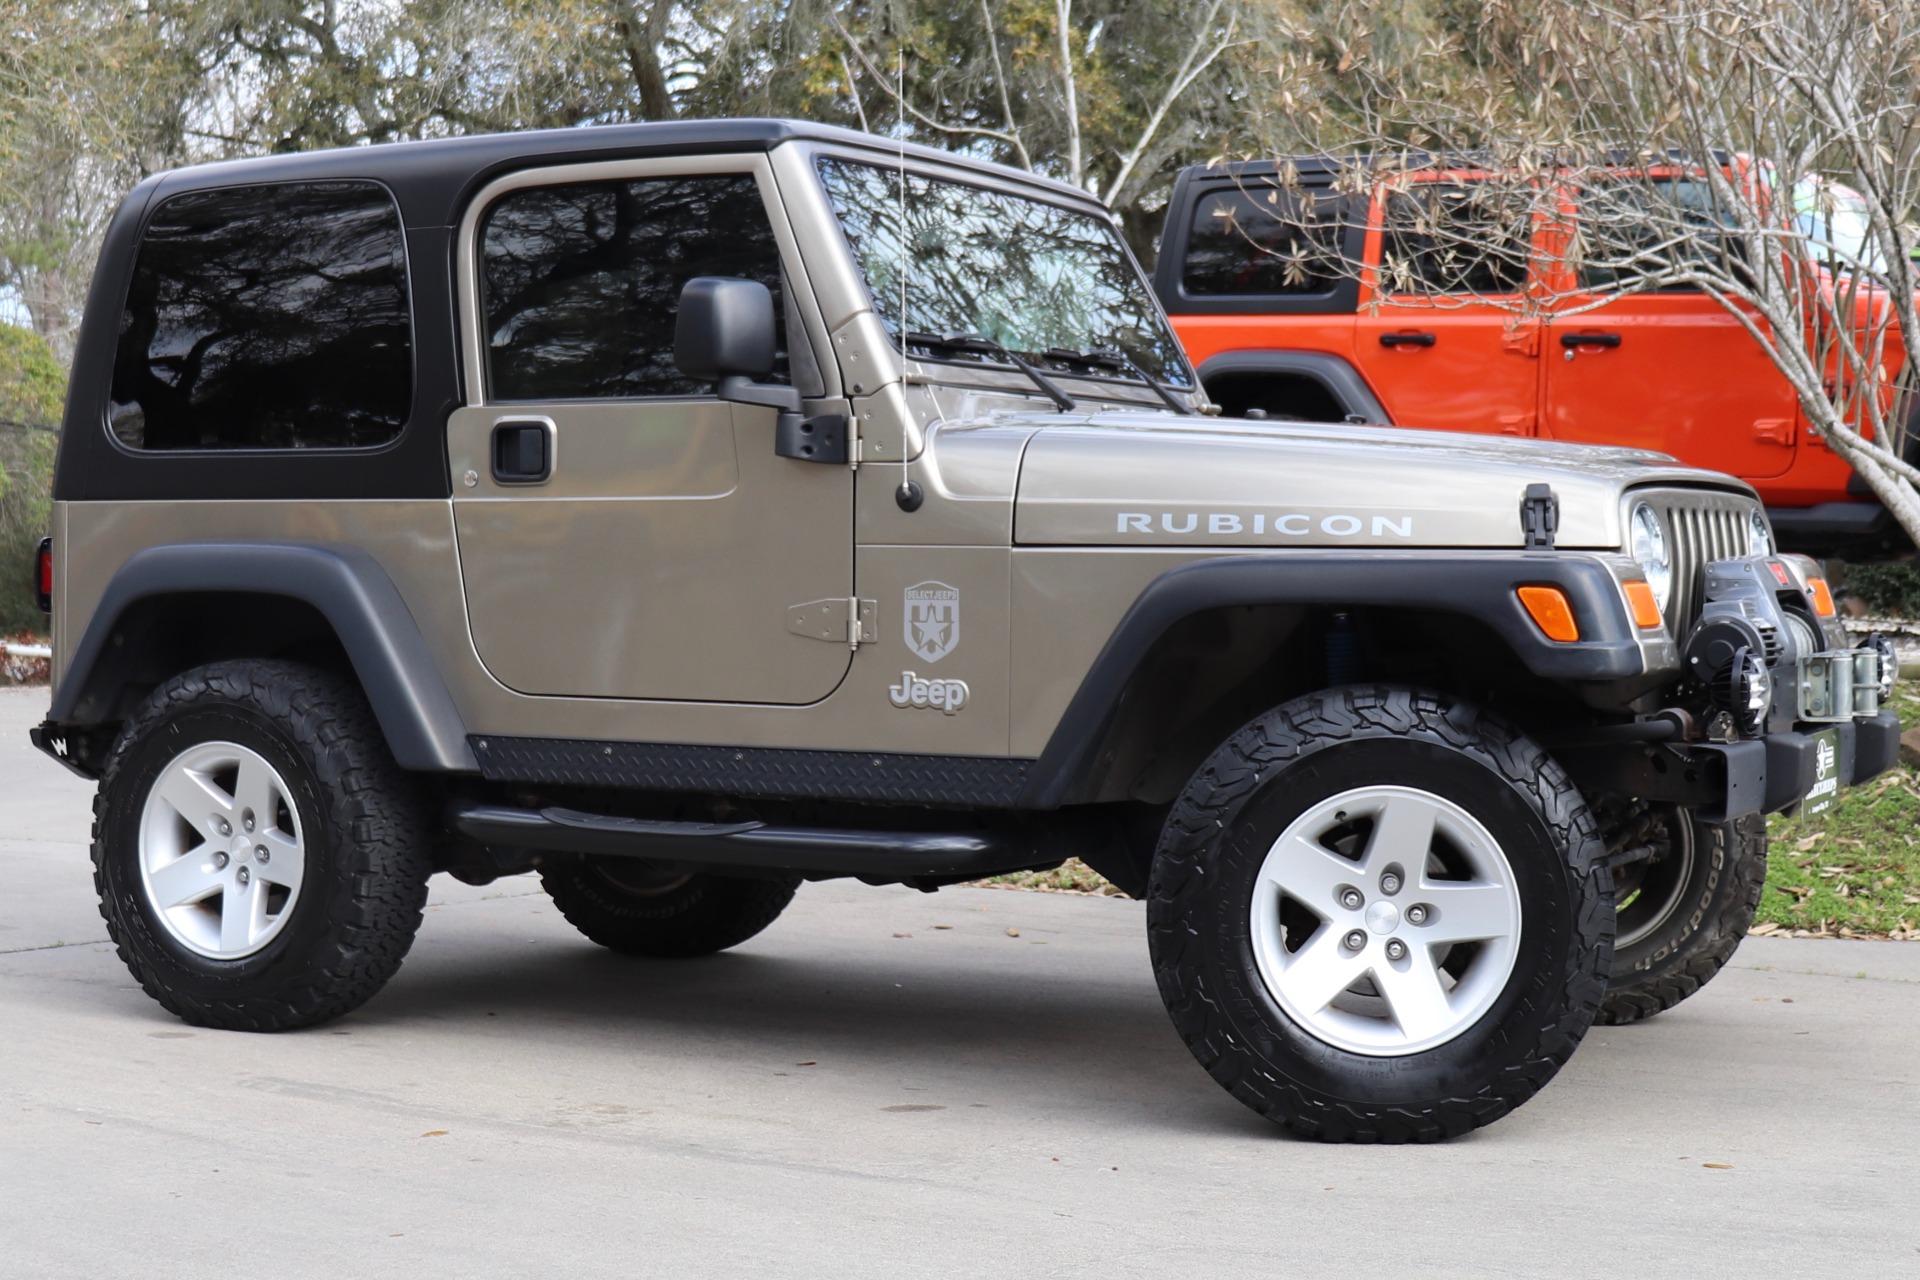 Used 2004 Jeep Wrangler Rubicon For Sale ($23,995) | Select Jeeps Inc.  Stock #748414